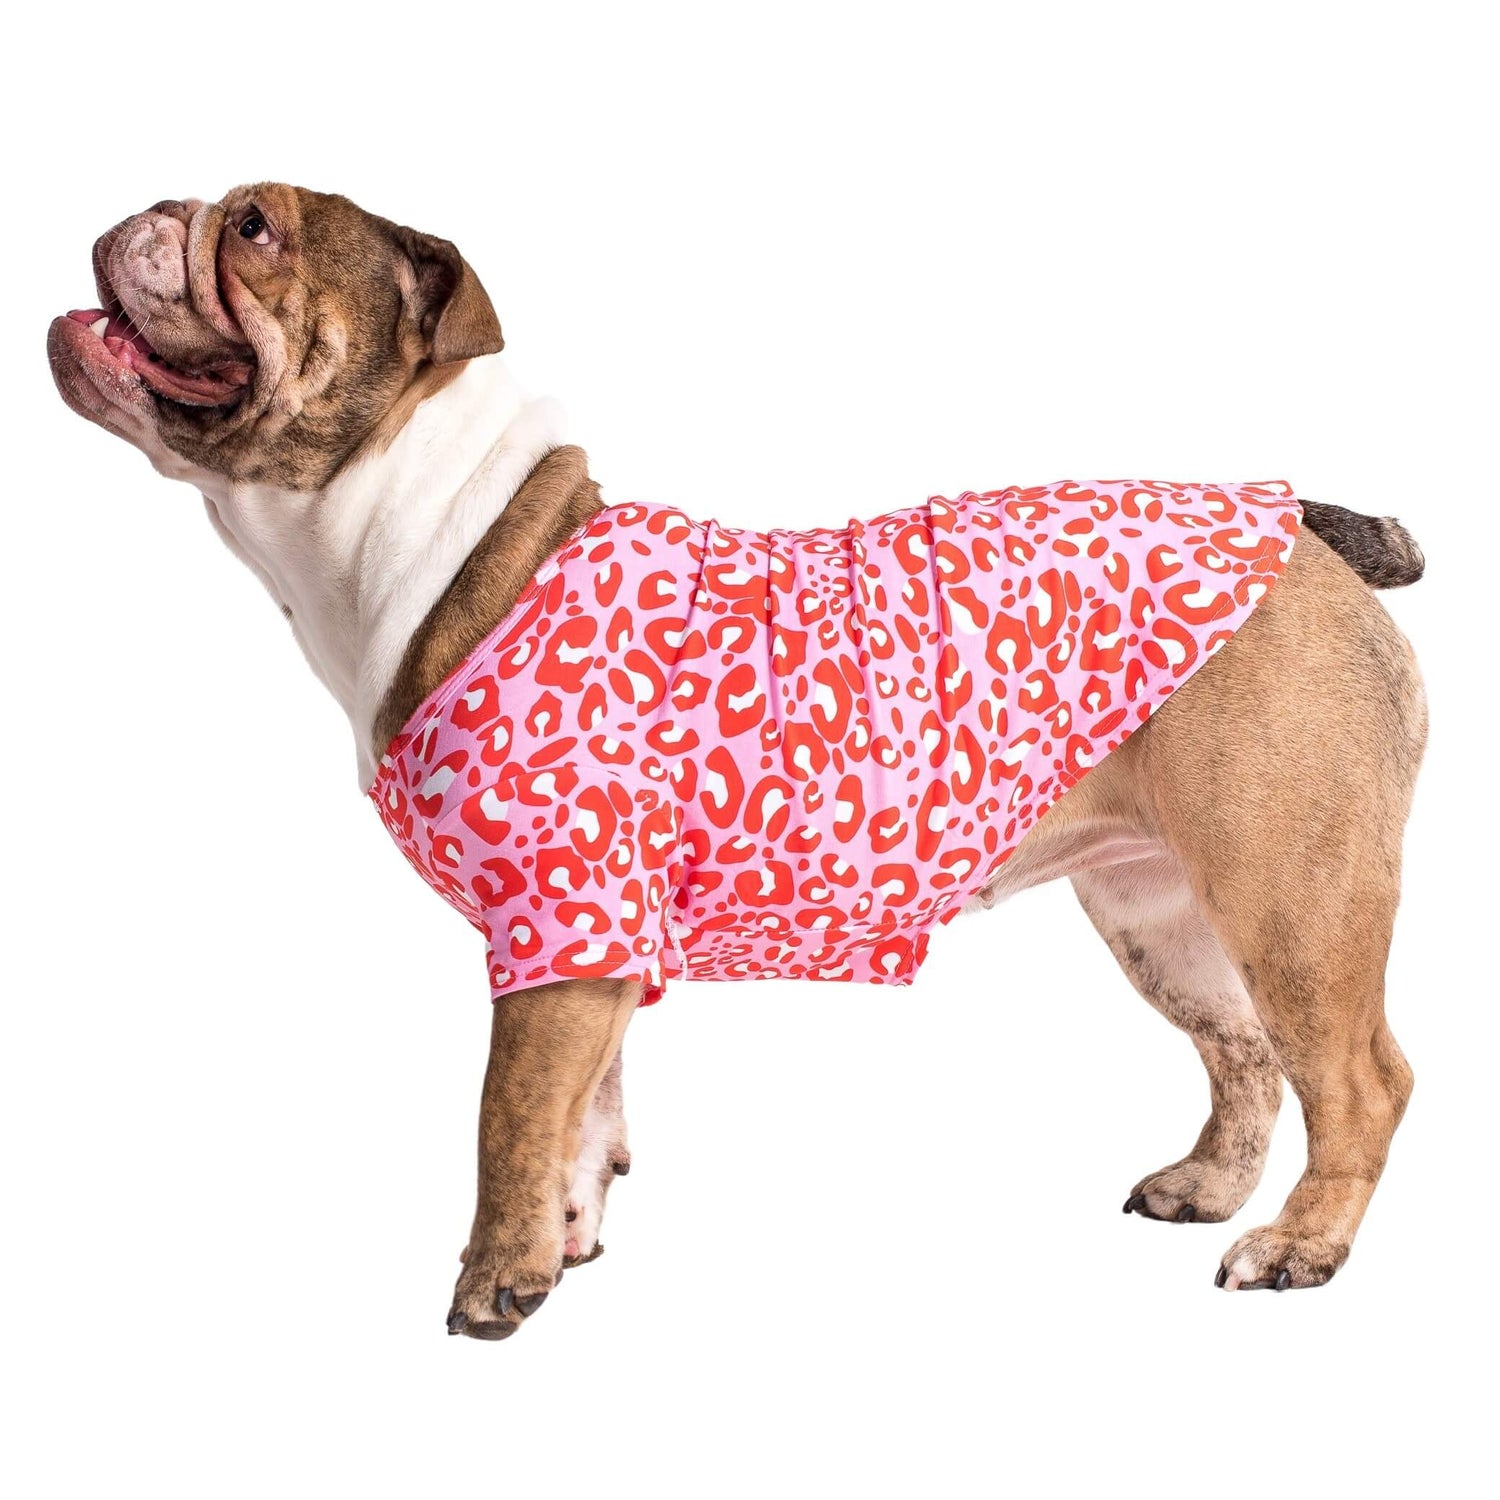 An English Bulldog standing side on wearing Vibrant Hounds Fierve in Pink dog shirt. The shirt is a red and pink leopard print.